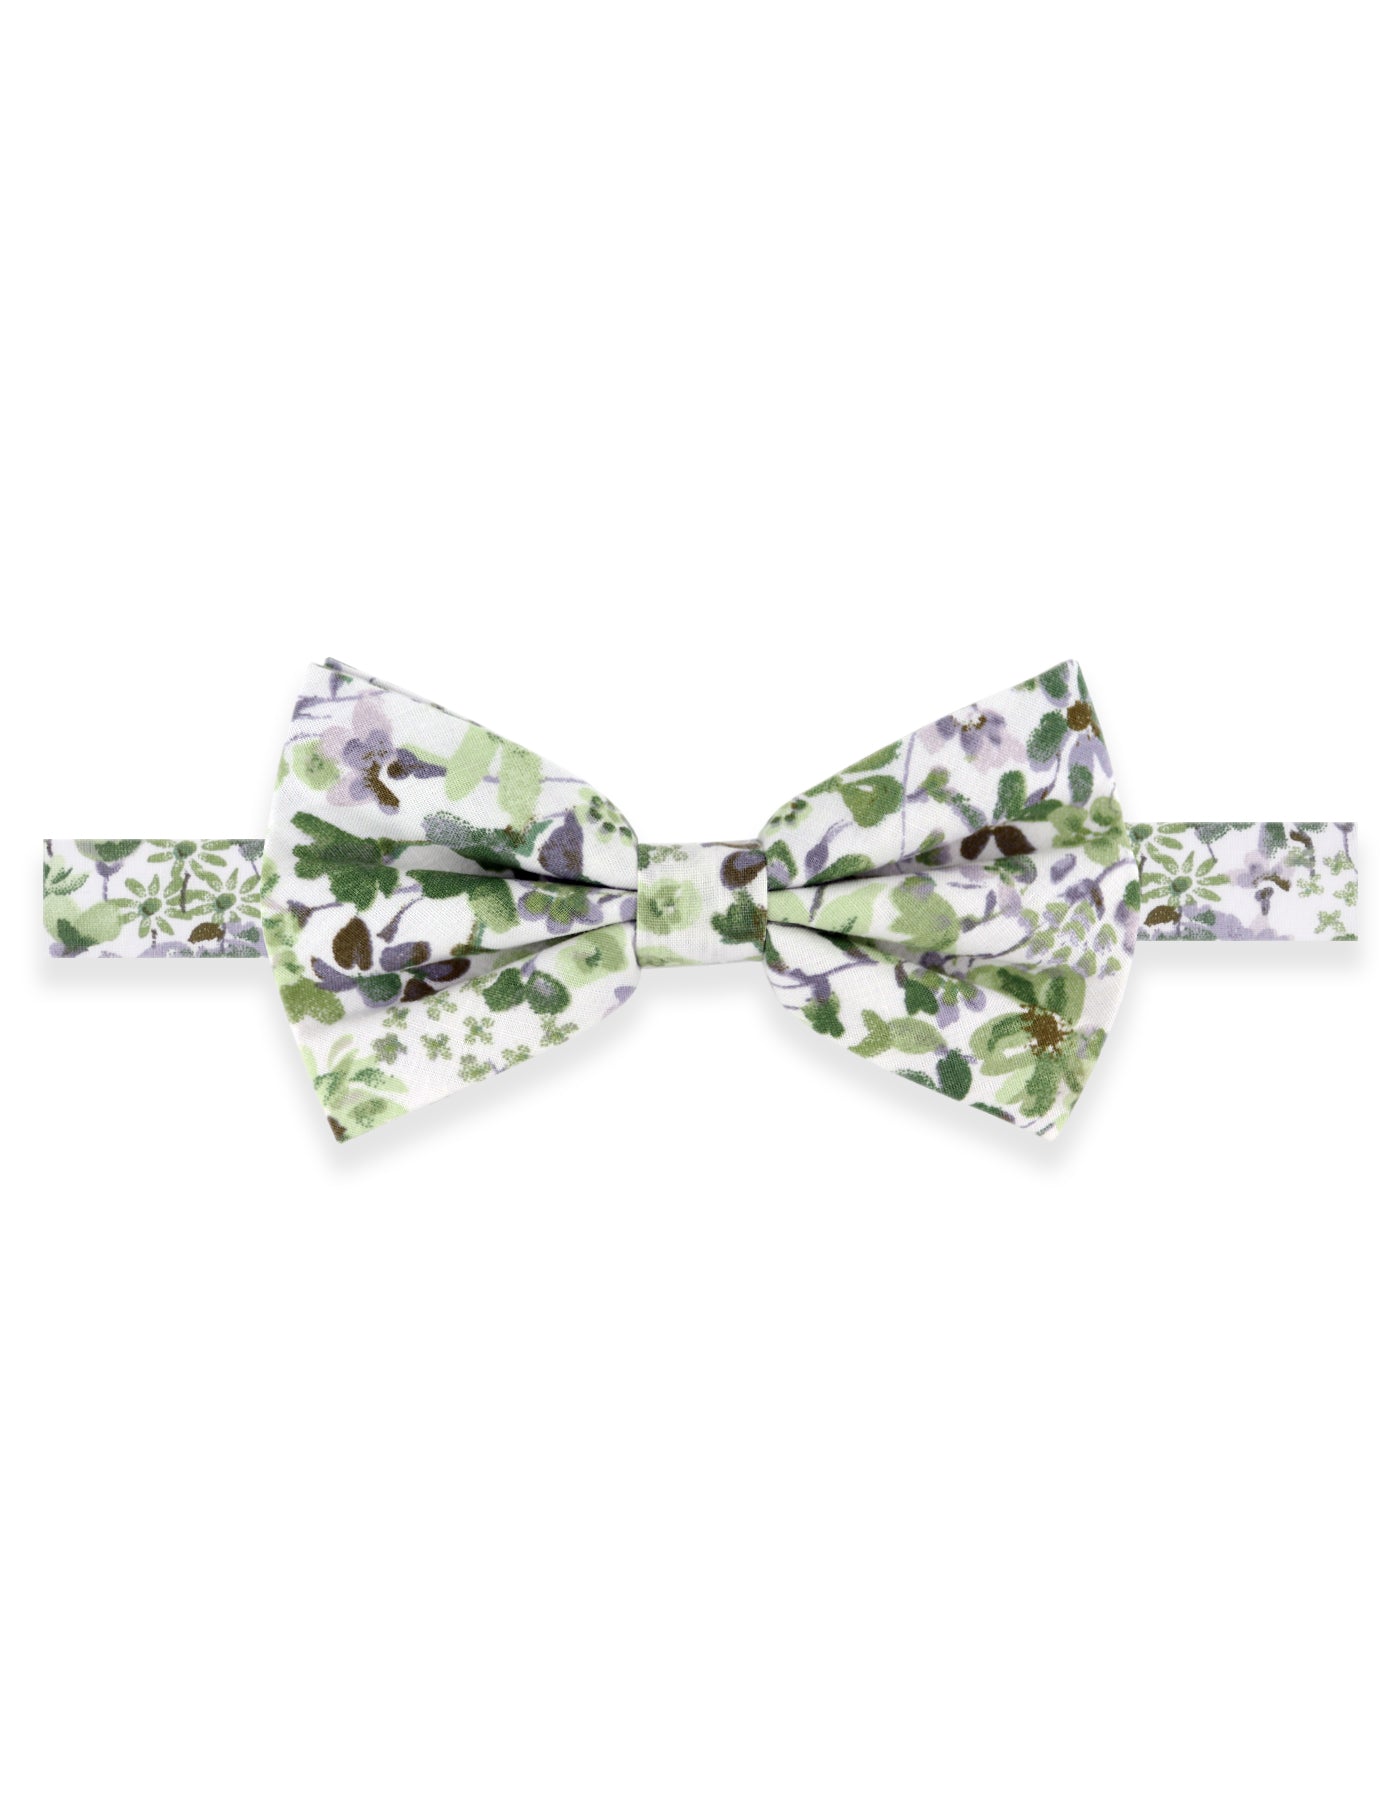 100% Cotton Floral Print Tie - Green And White